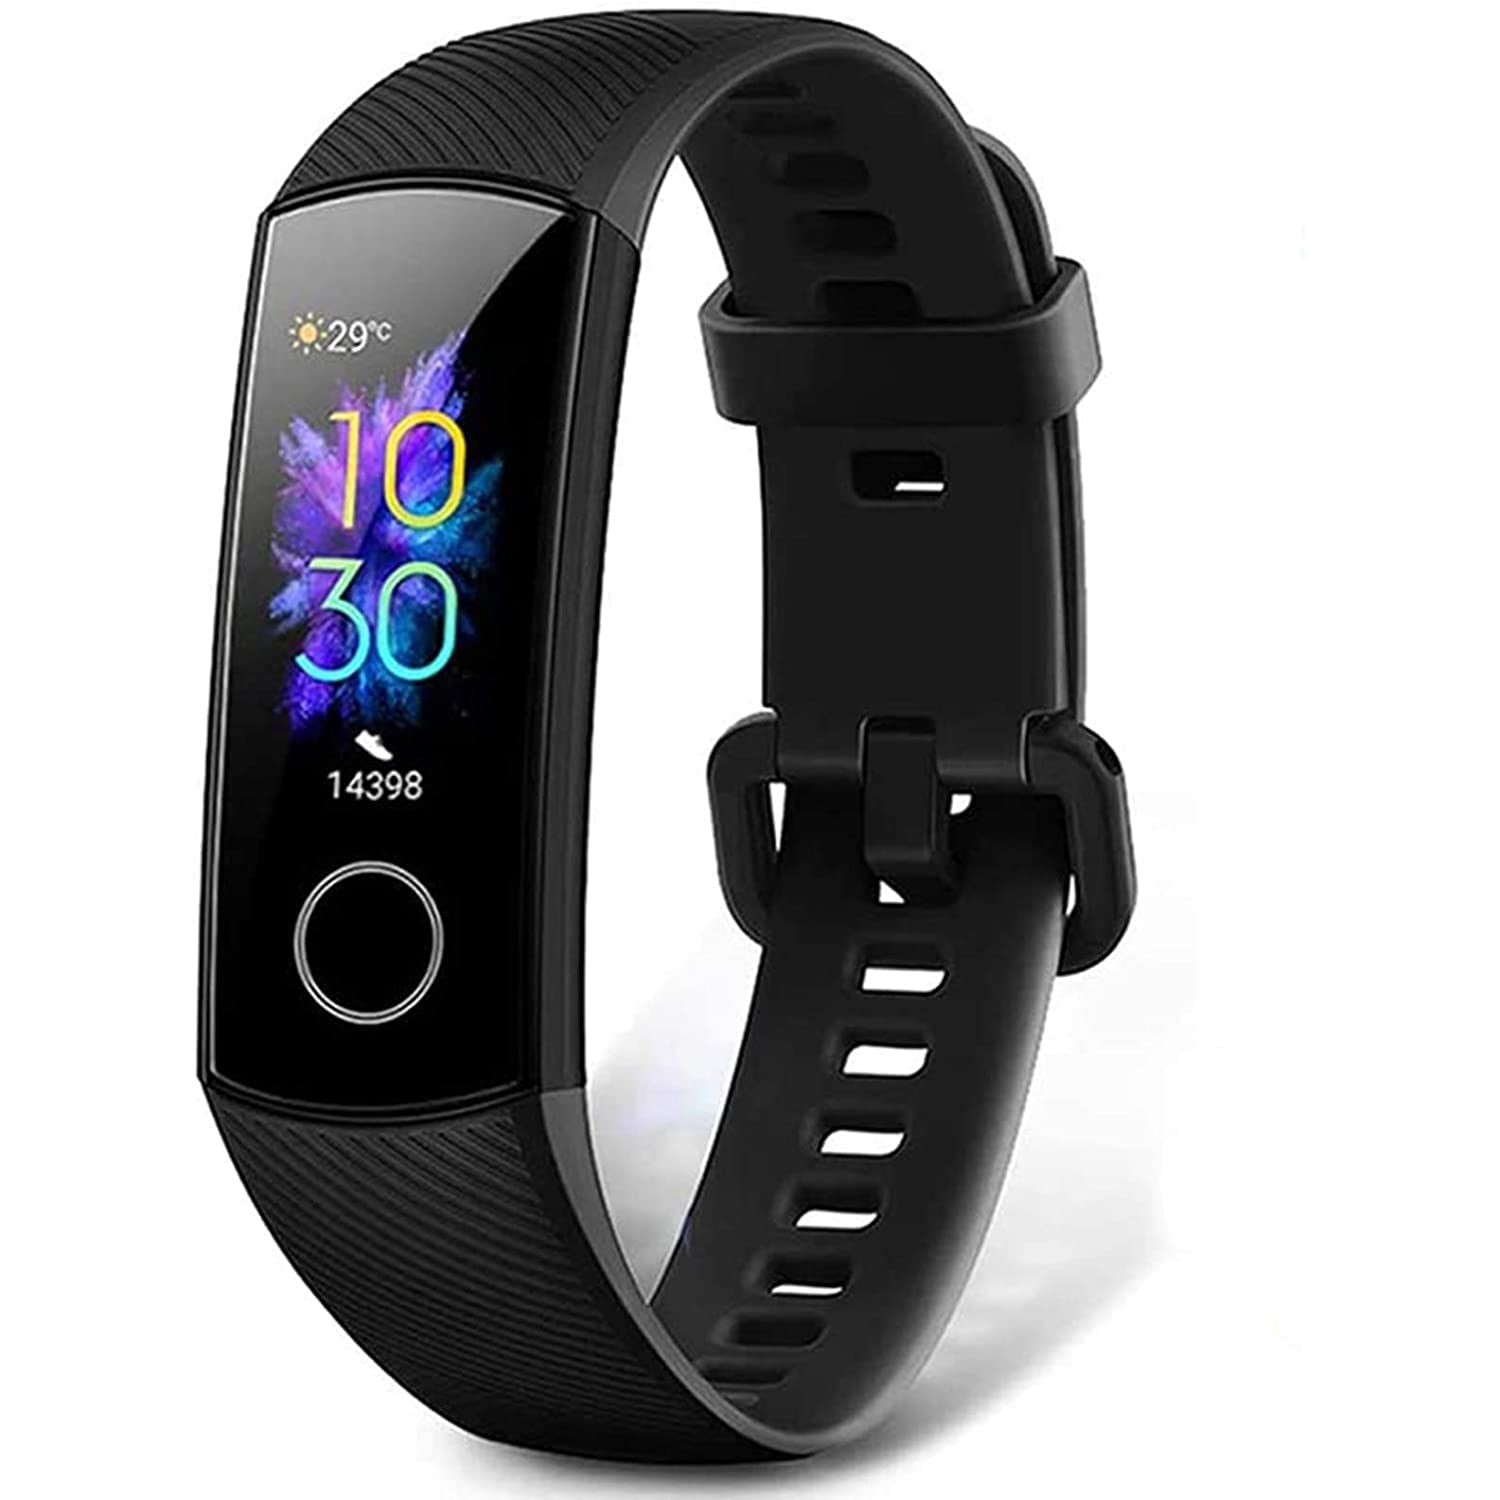 HONOR Band 5 Fitness Tracker with SpO2 Heart Rate and Sleep Monitor - Black - Refurbished Excellent